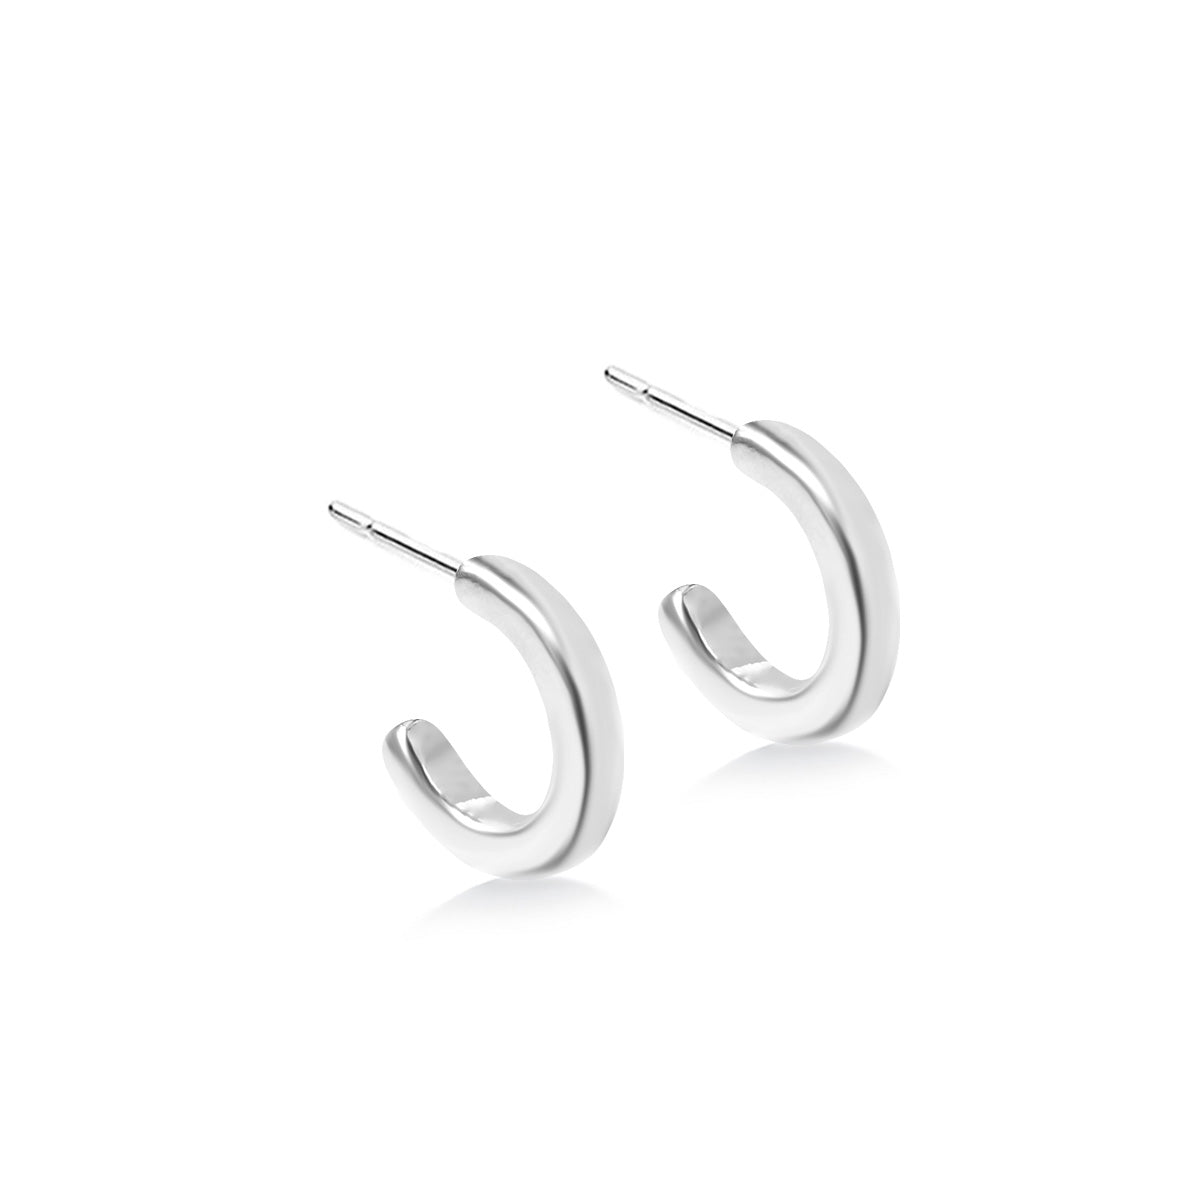 Silver Square Section Open Hoop Earrings | Hersey & Son Silversmiths